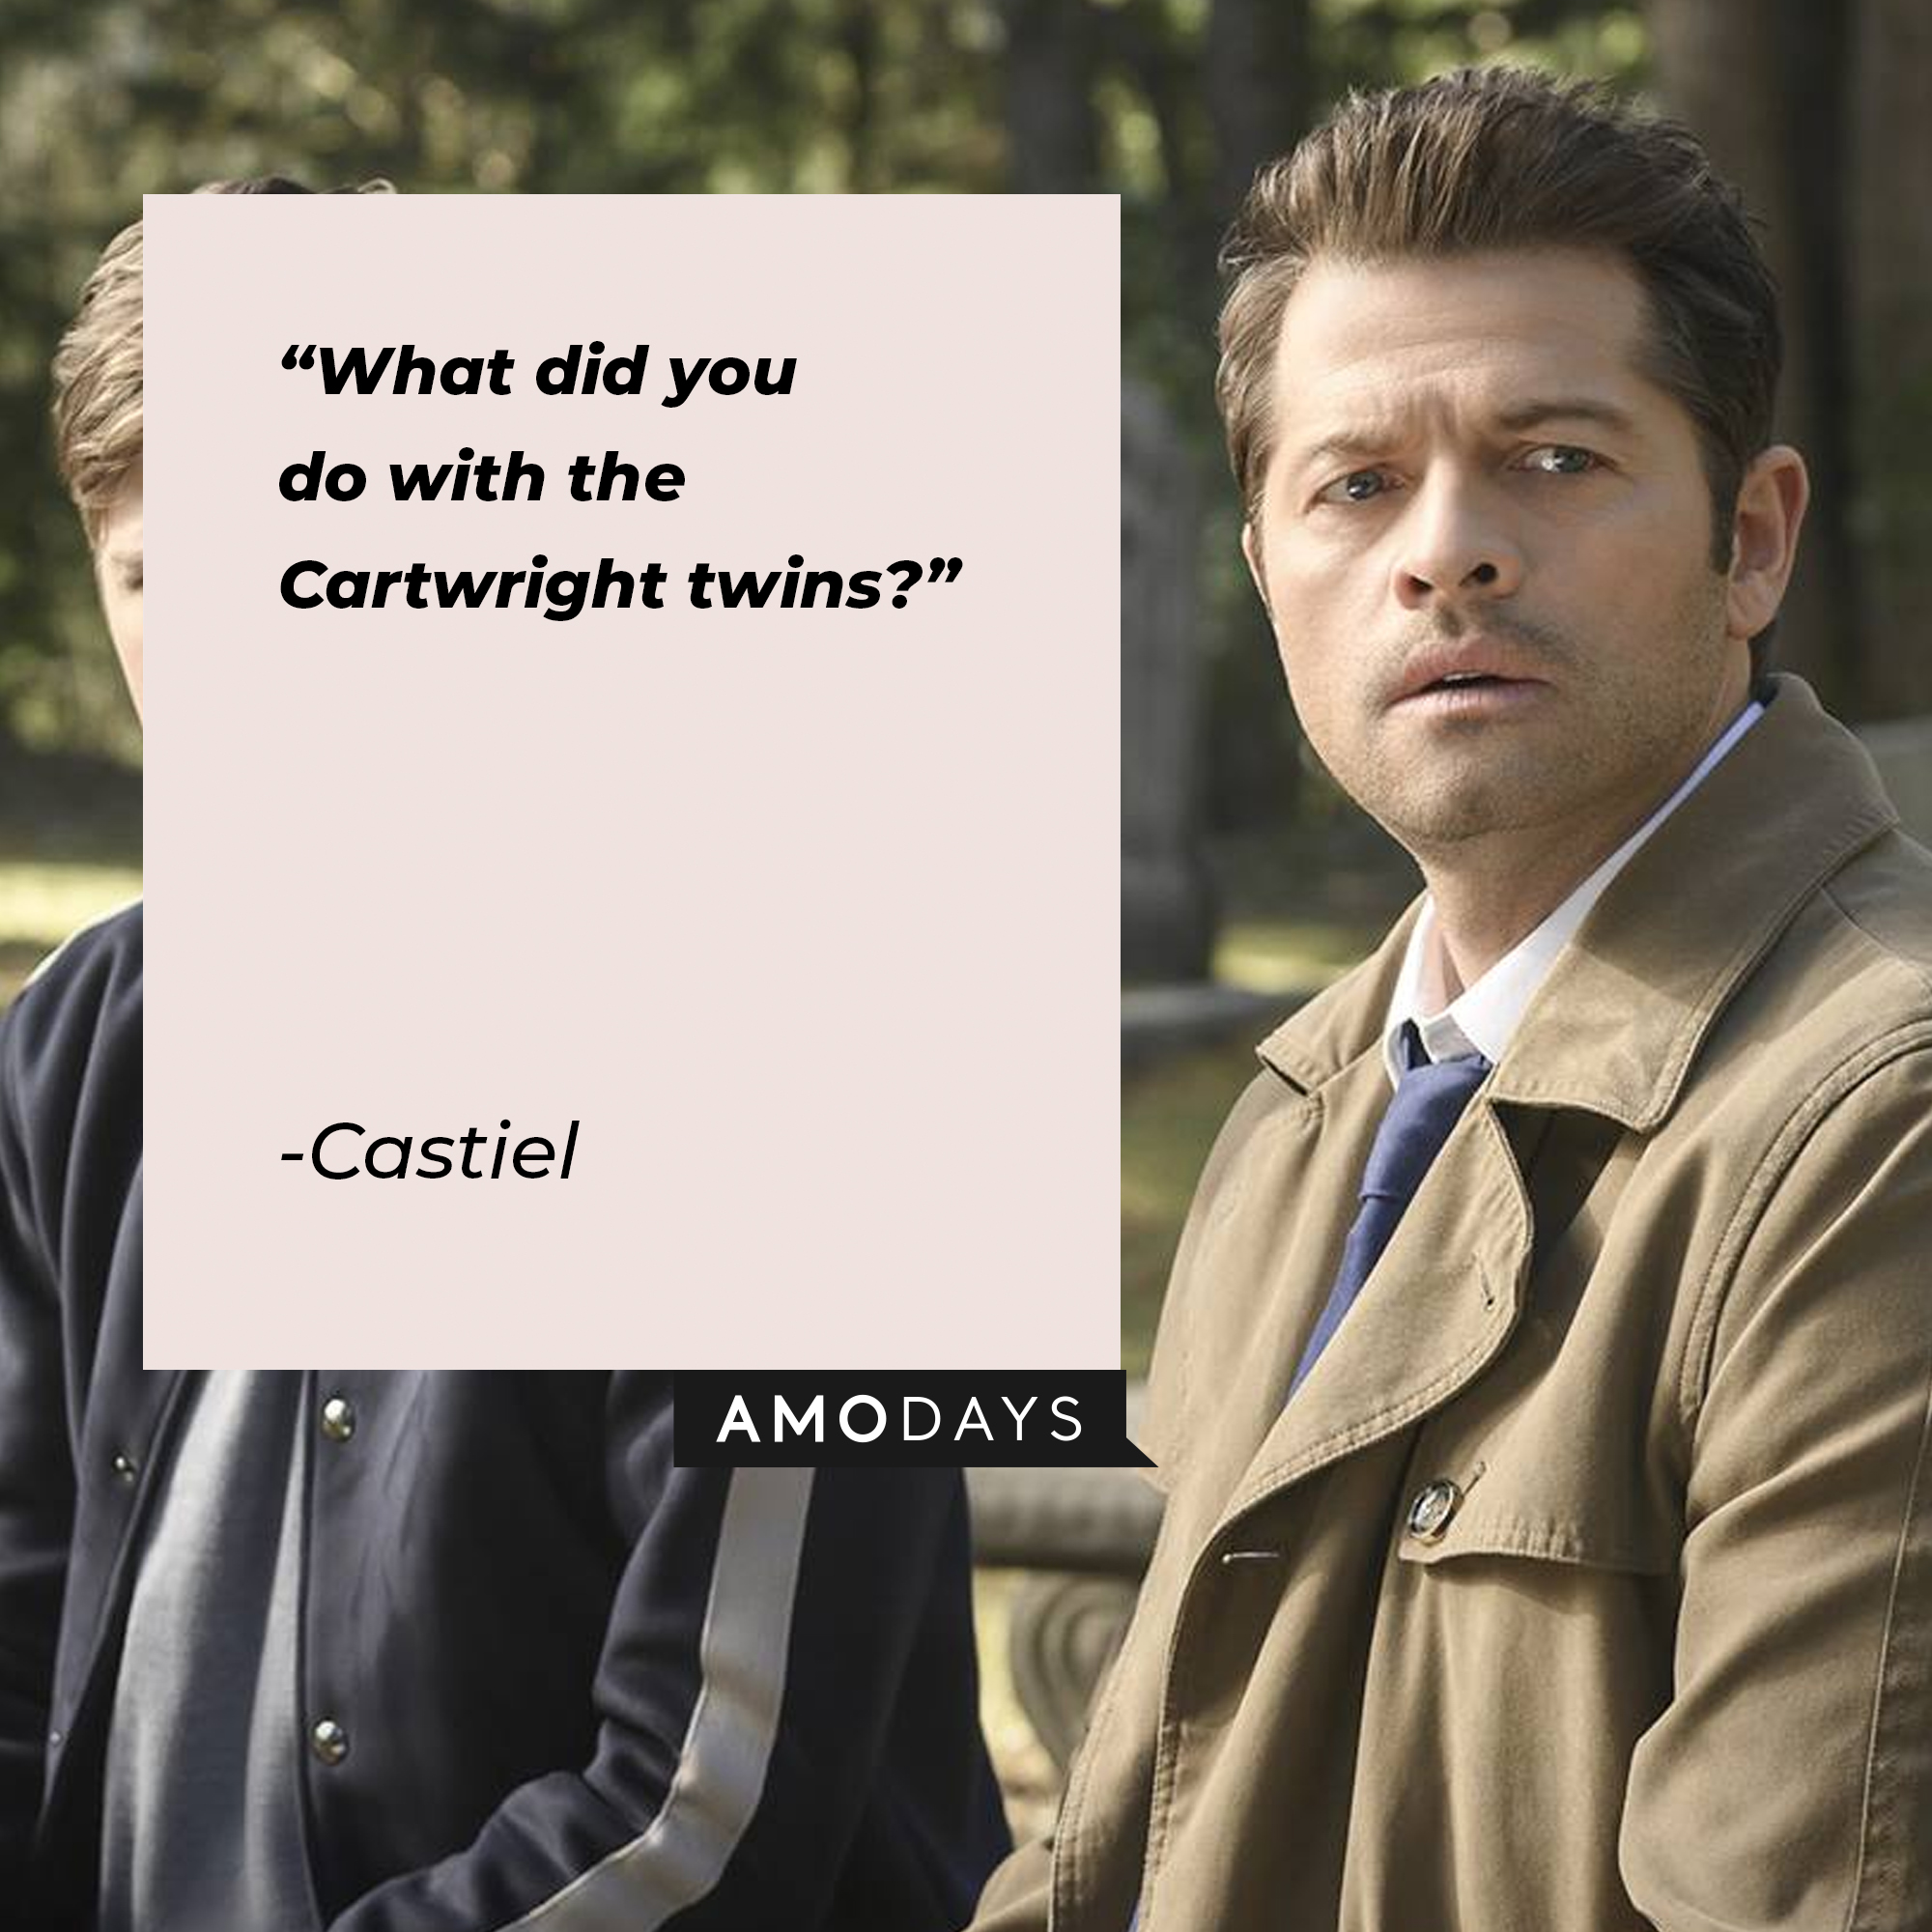 An image of Castiel with his quote: “What did you do with the Cartwright twins?” |Source: facebook.com/Supernatural